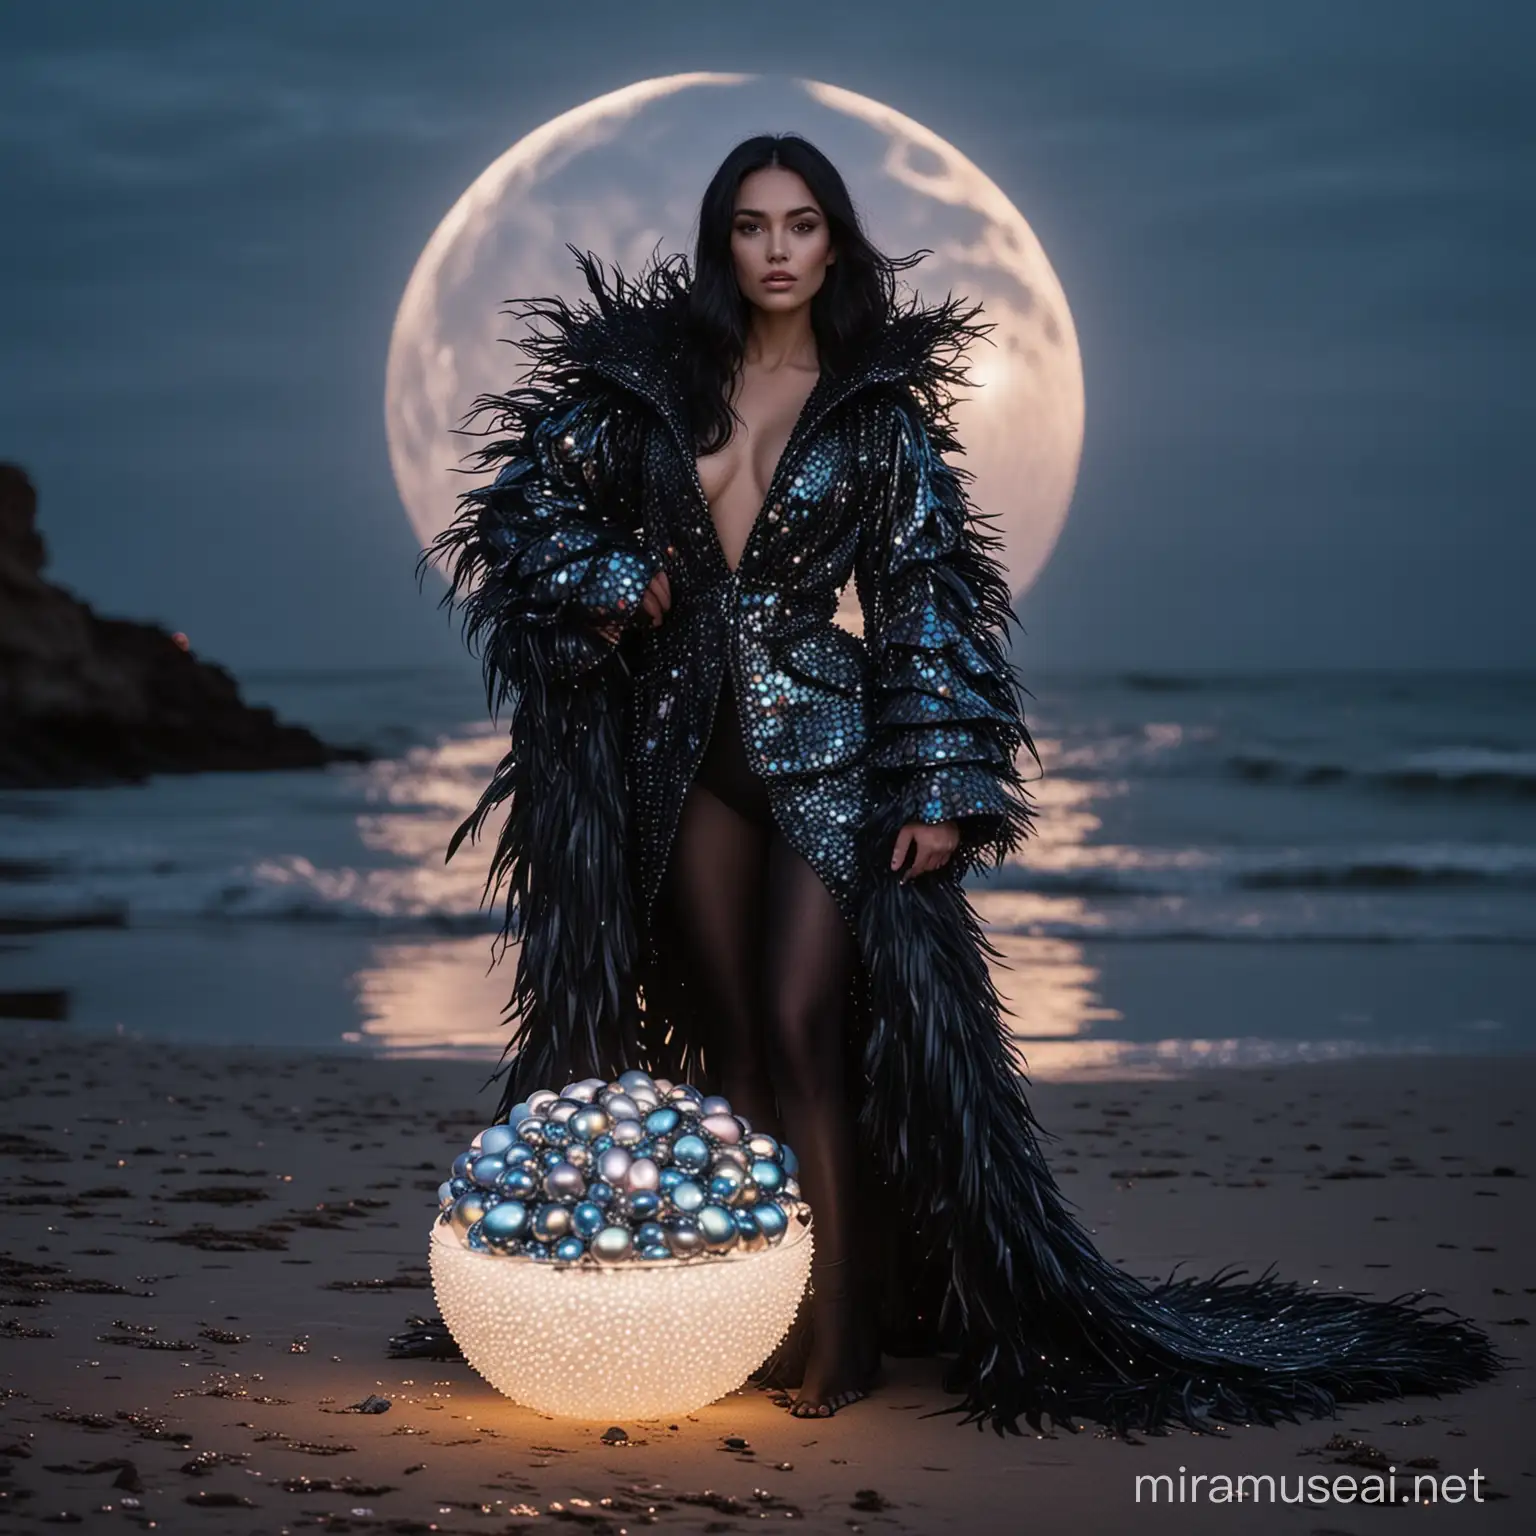 A gorgeous neon glowing woman model holding a metallic black blue colored tiny dragon inside silver eggshell, pearl iridescent colors, wearing metallic black shiny Schiapirelli inspired couture feather jacket, silver shiny crone, water are extreme long black hair, wes anderson color palette, dark night with gigantic moon beach background, 35mm photography